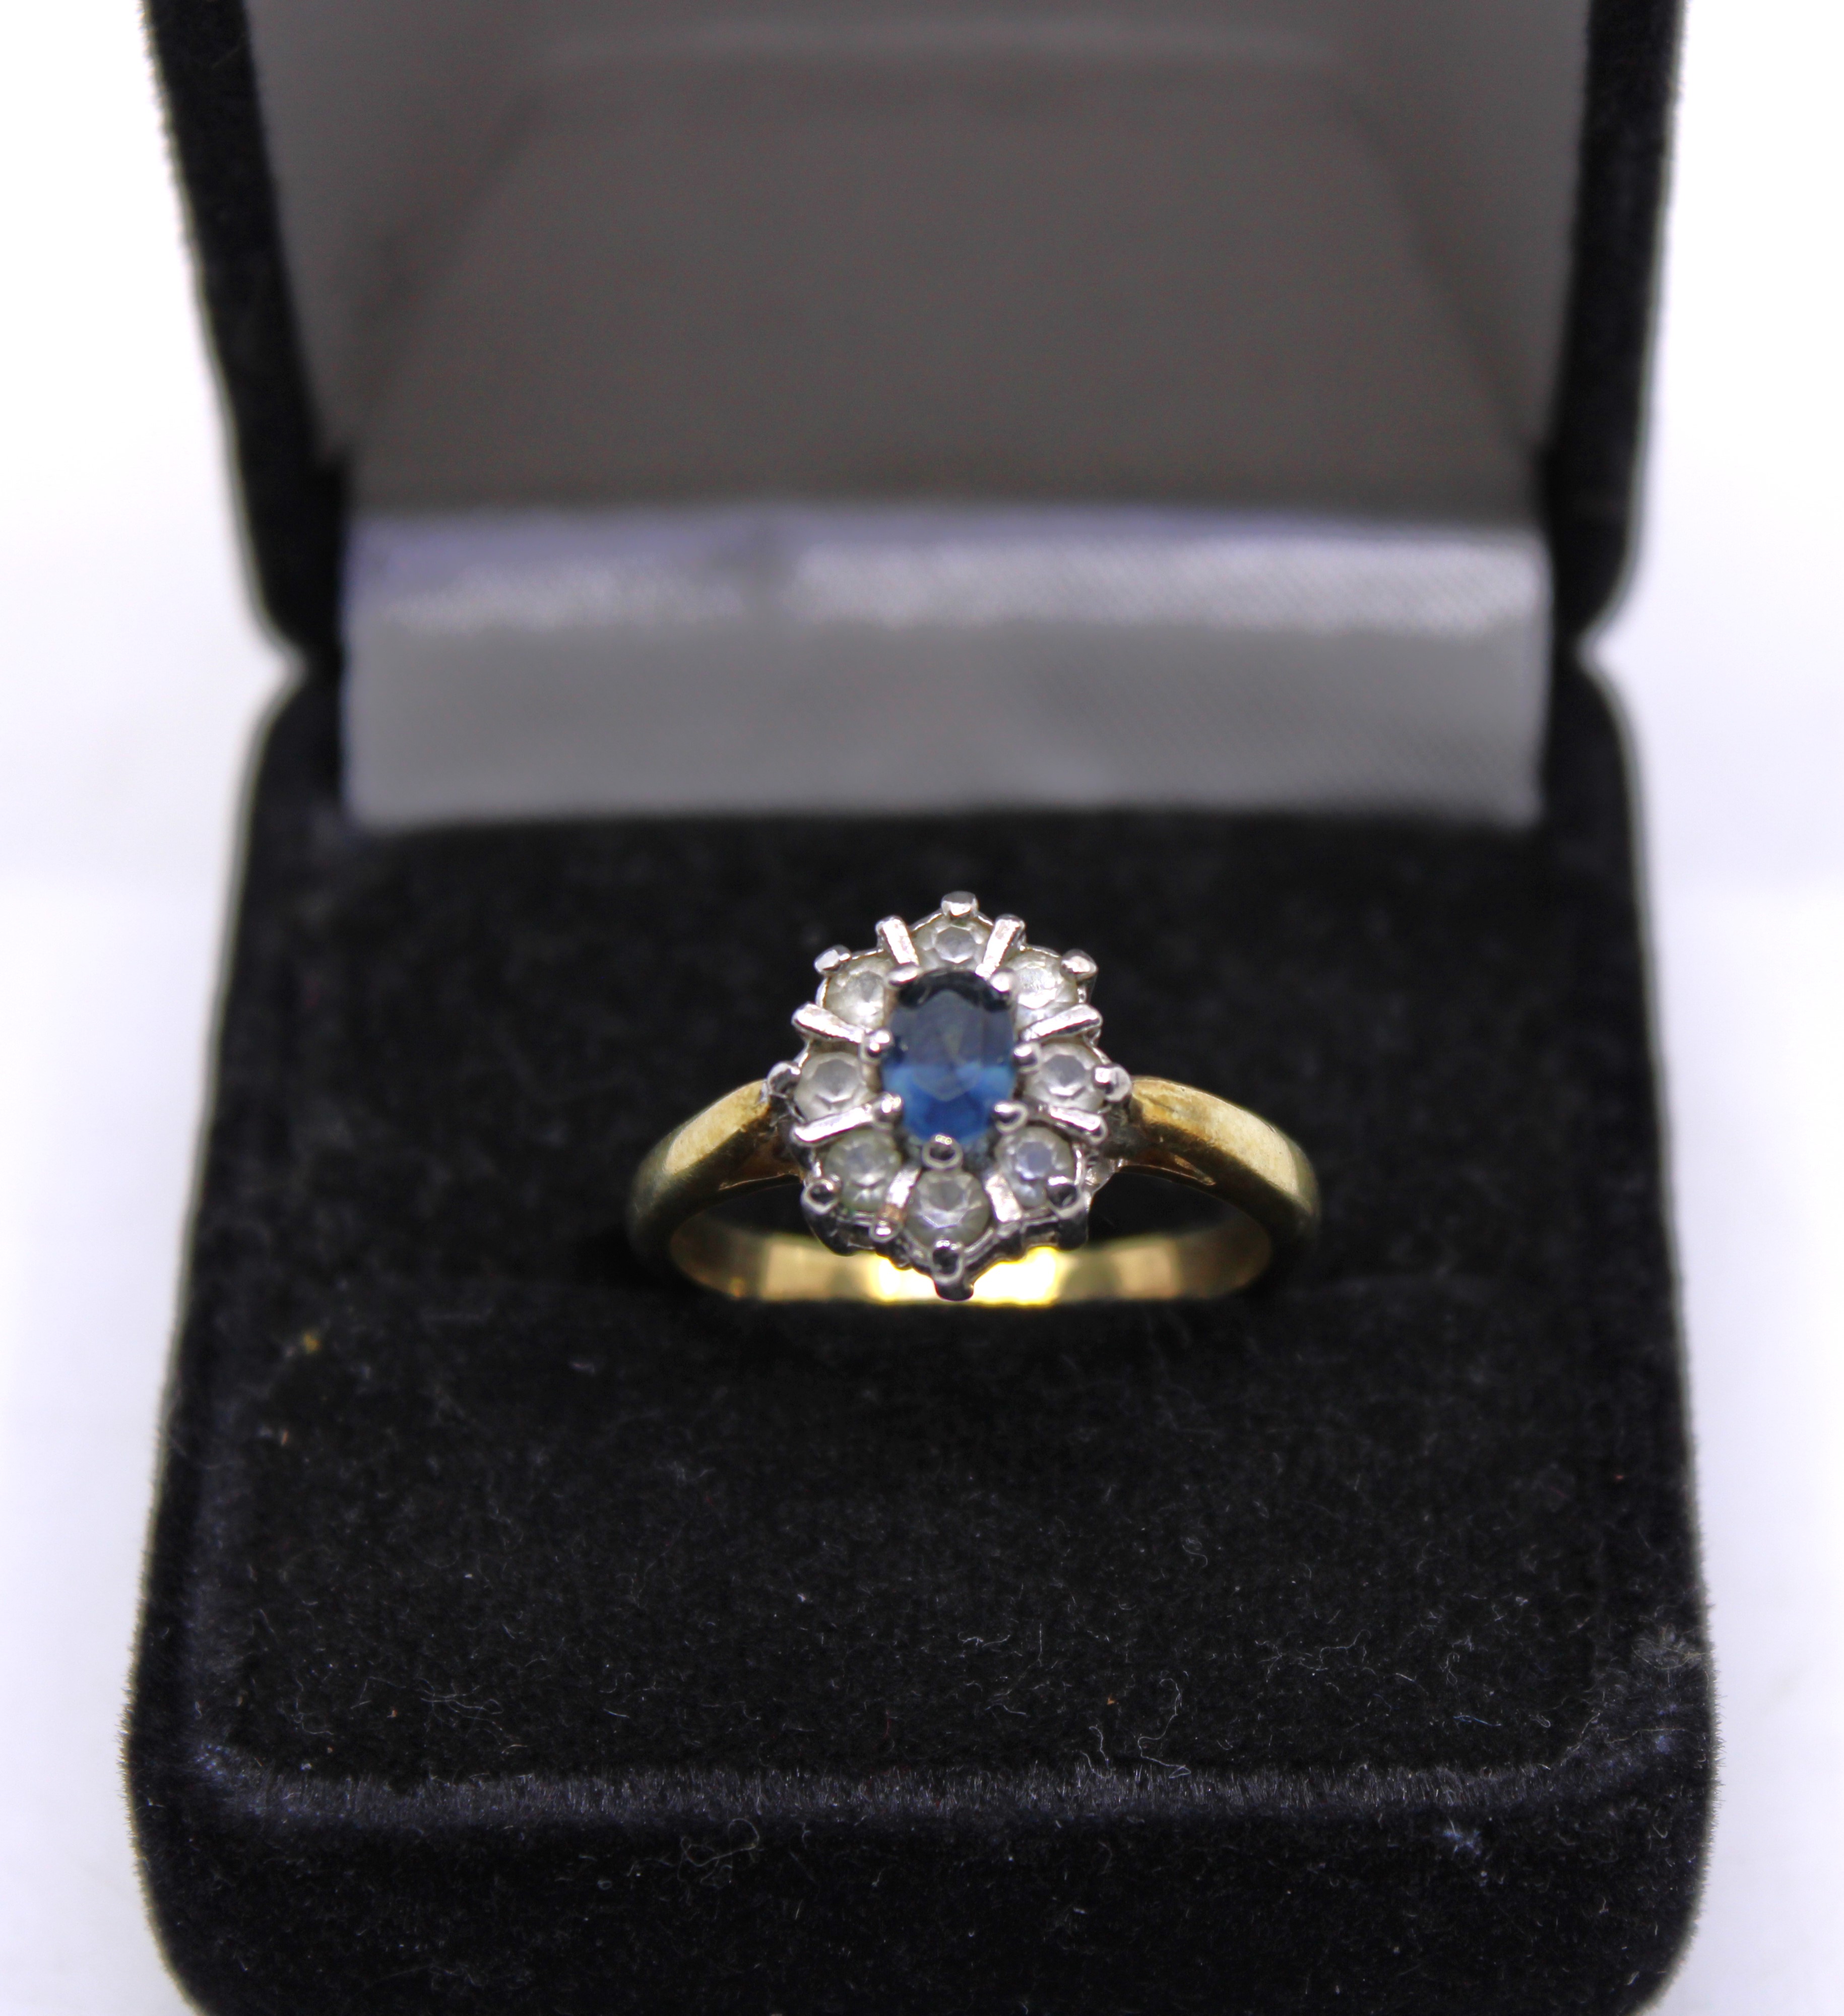 Unmarked Yellow Metal Sapphire and Colourless Stone ring. Tested as 9ct Gold.  The Oval Brilliant